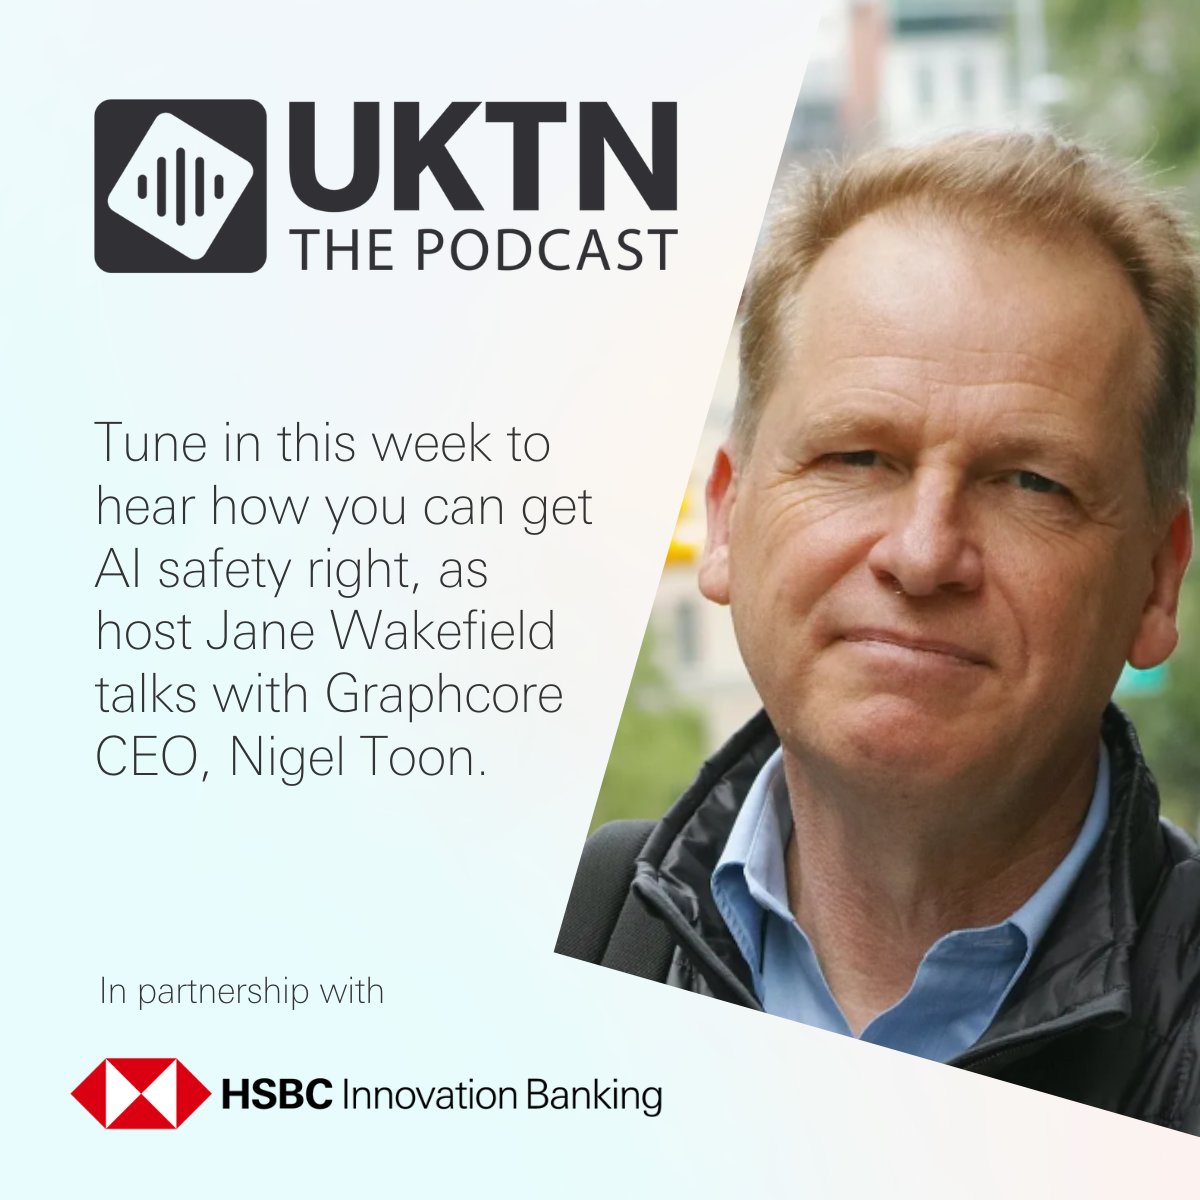 It's Tuesday, which means it's time for The @UKTNofficial Podcast, in partnership with @HSBCInnovation Banking UK. Host @janewakefield is joined by Nigel Toon, CEO & Co-Founder of @graphcoreai to talk about all things AI safety: grp.hsbc/6017uYtAb #Podcast #TechTalk #UKTN